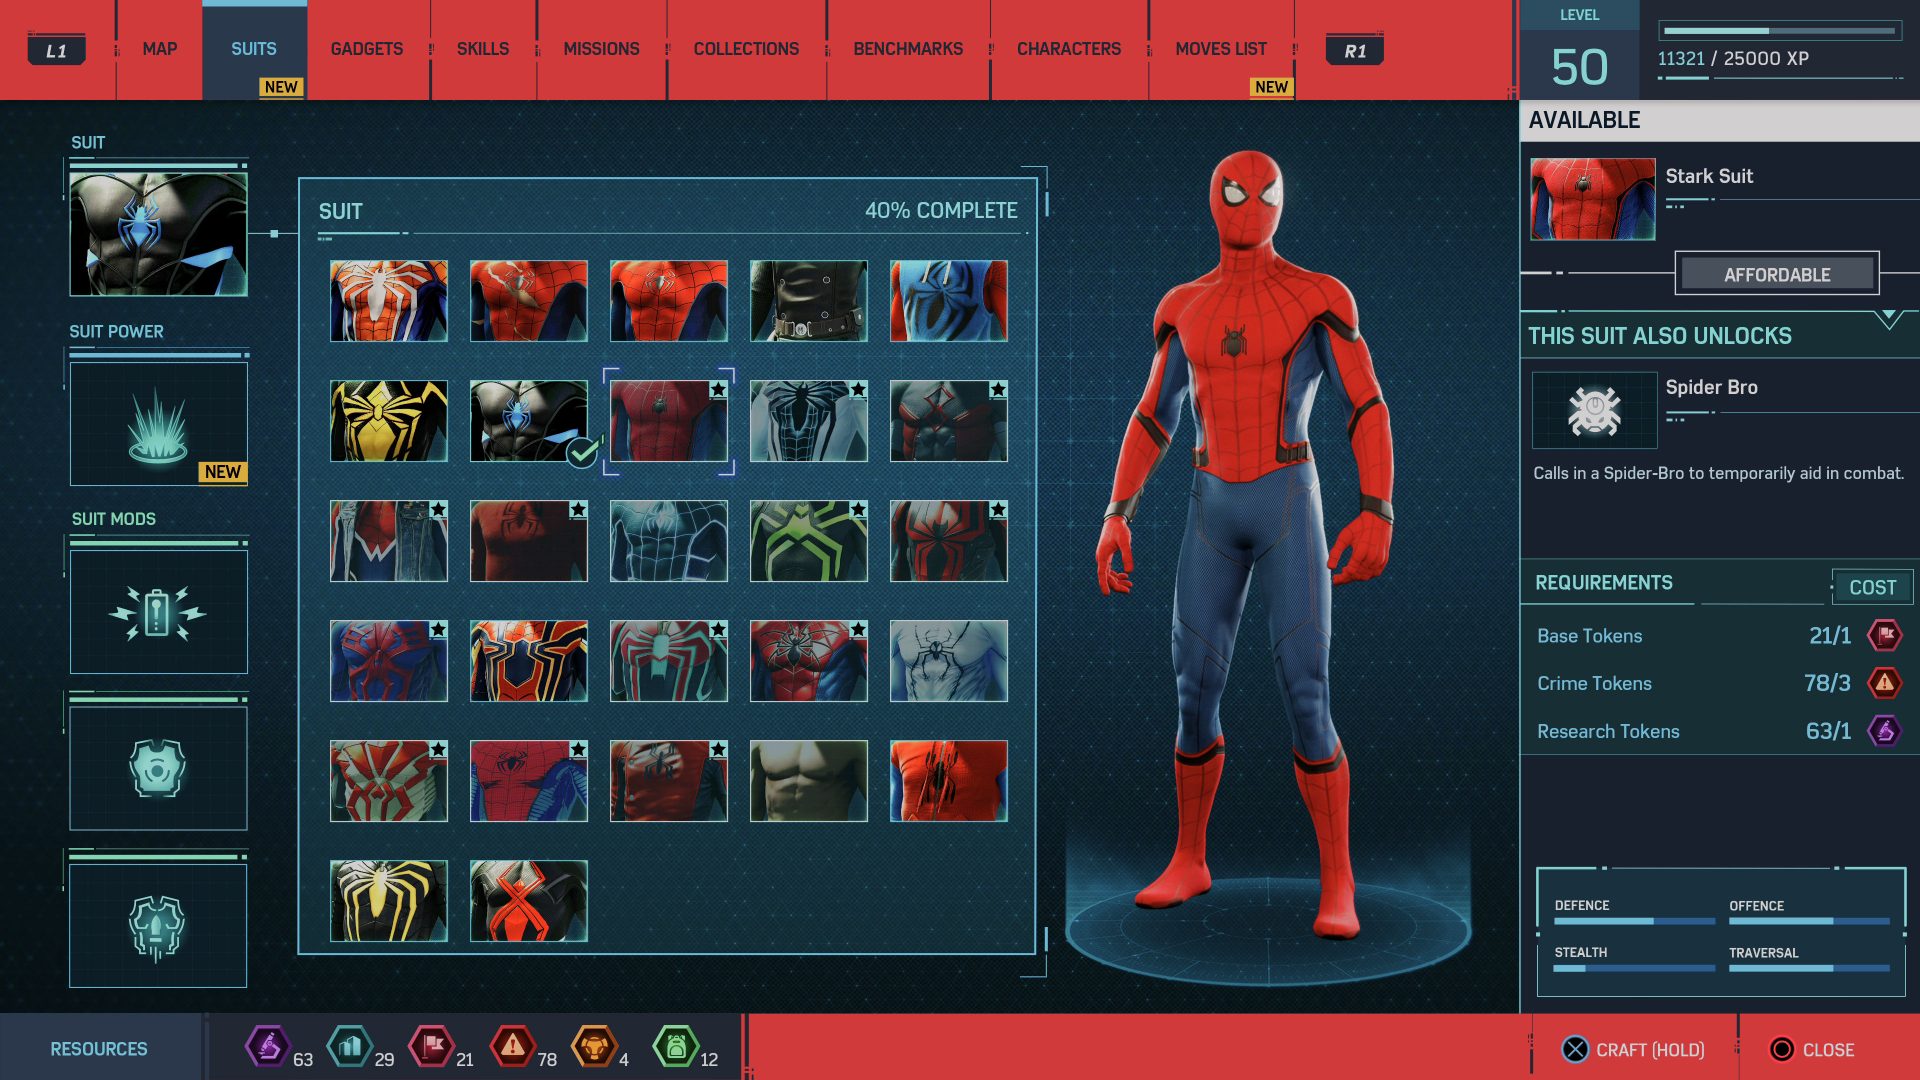 Spider-Man Homecoming Suit